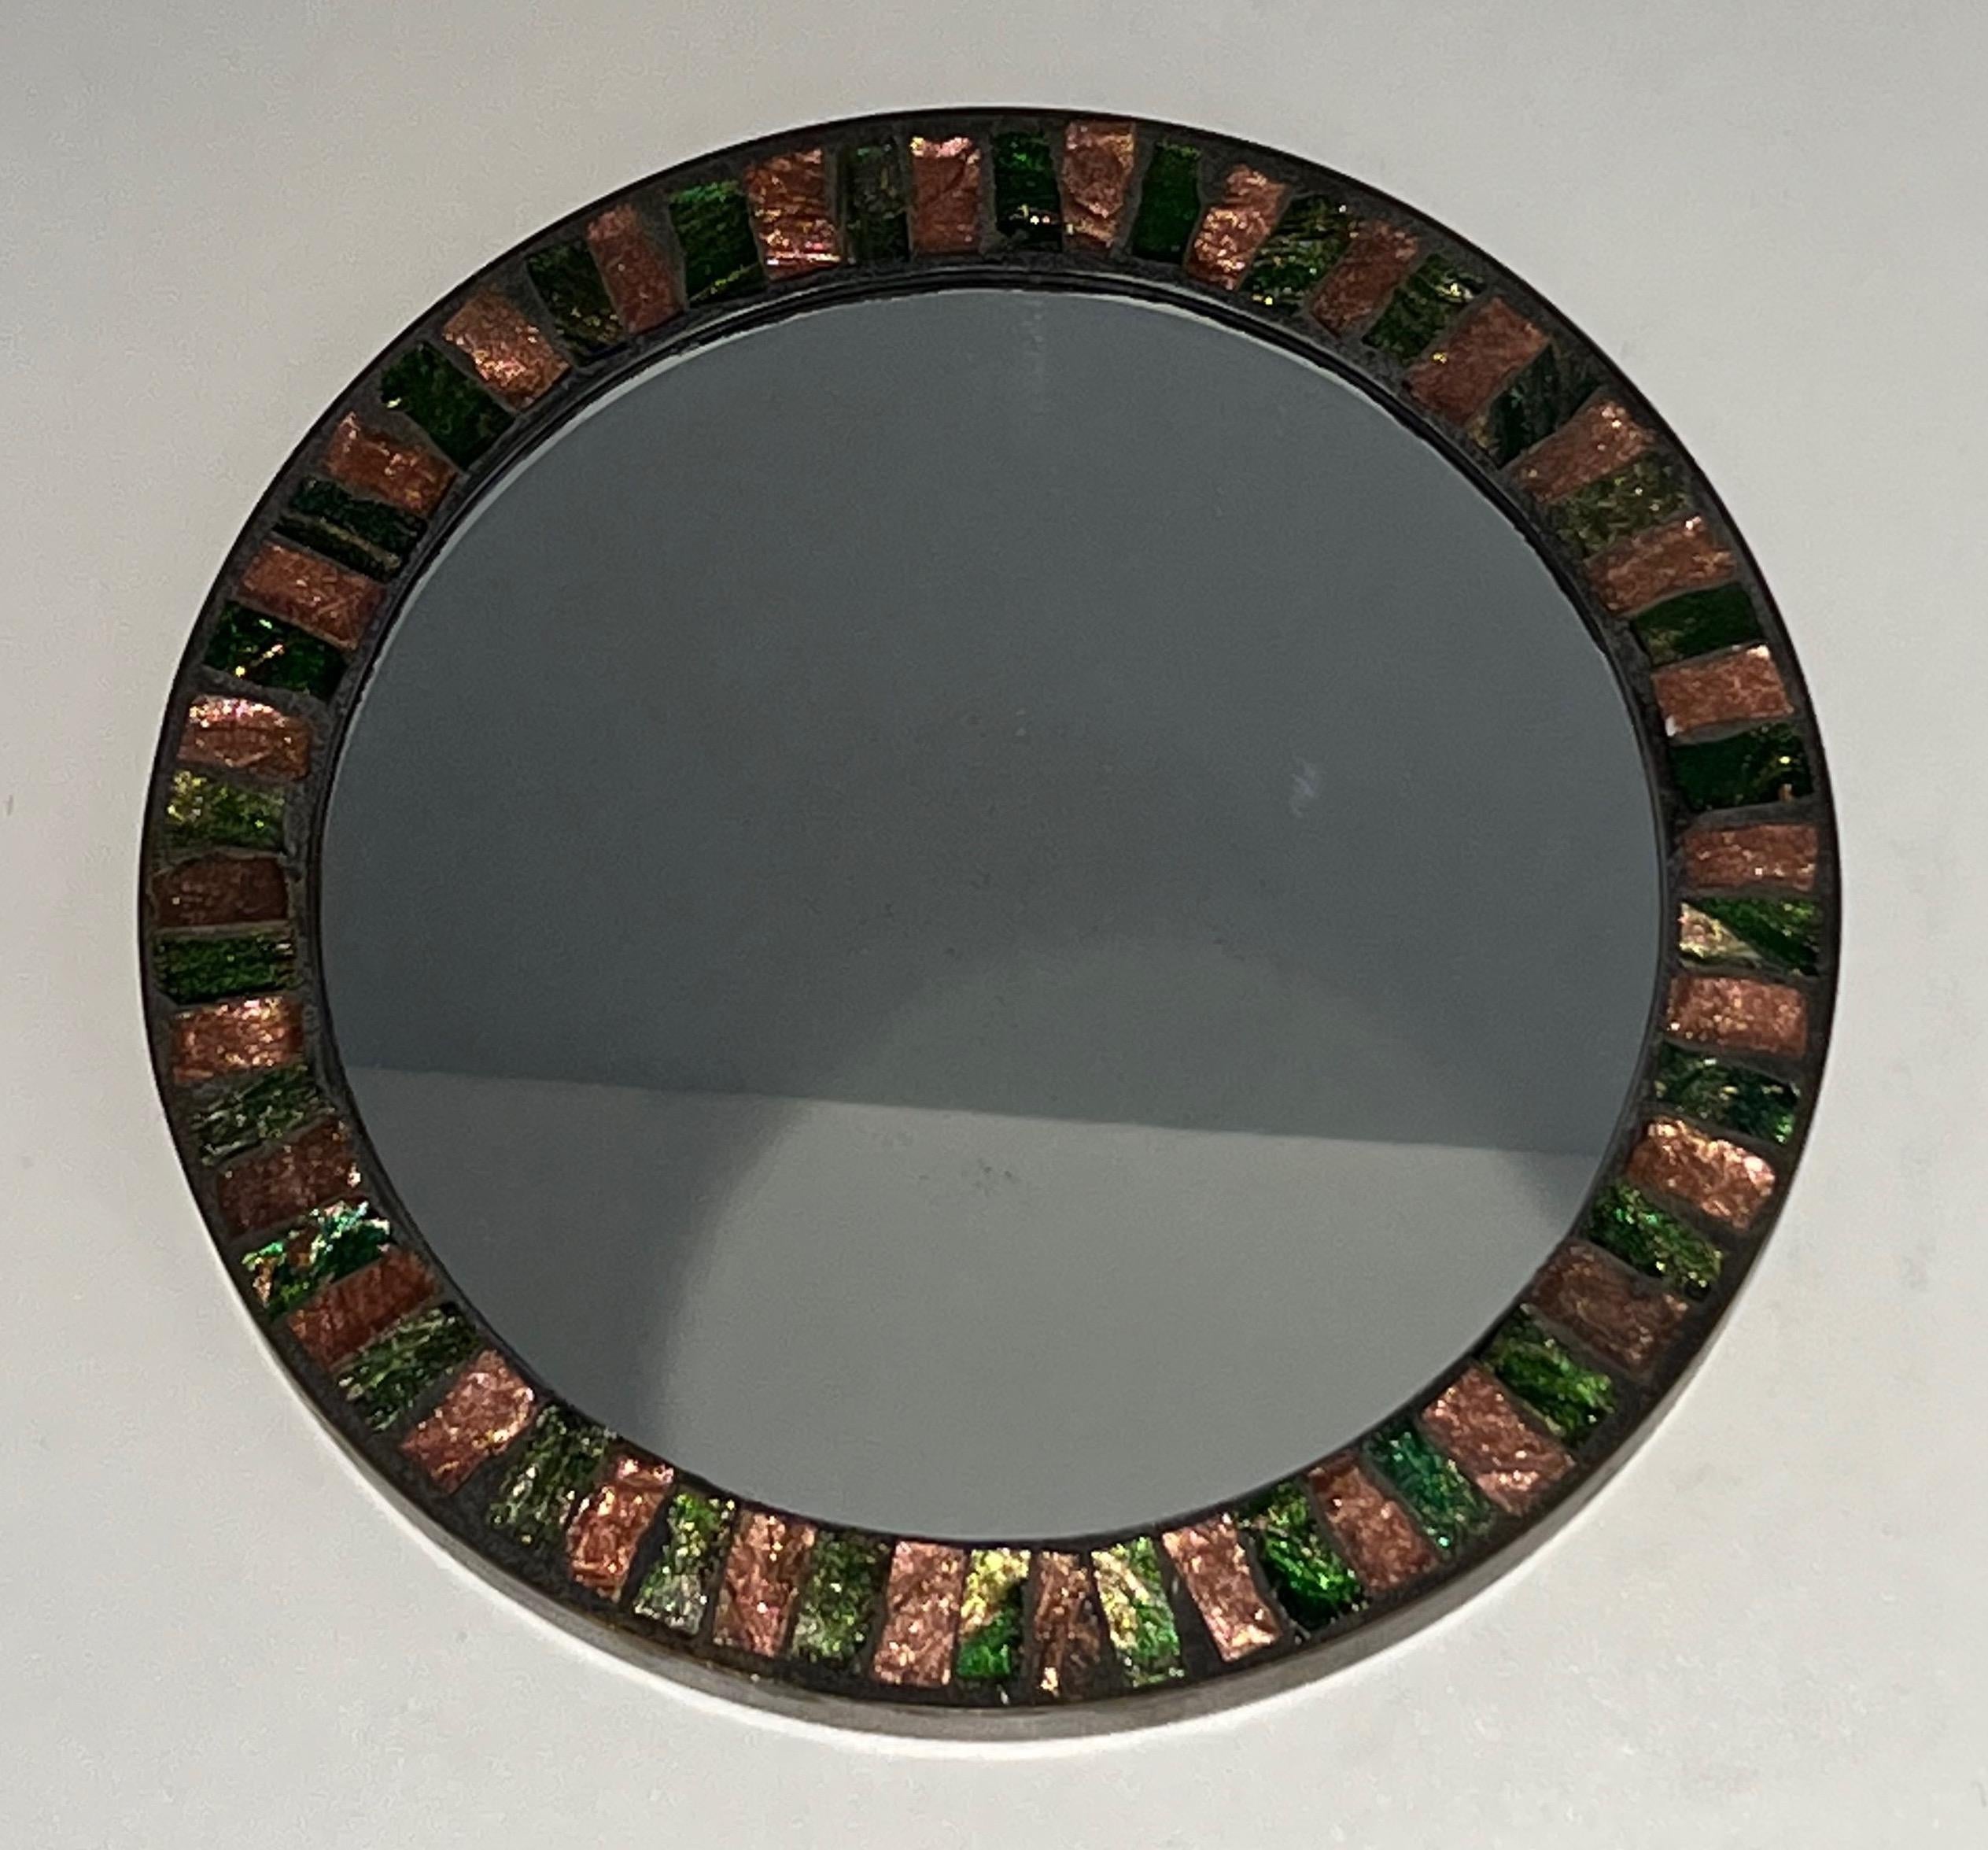 This very nice round mirror is made of a glazed ceramic surrounded by a brass band. This is a French work. Circa 1950